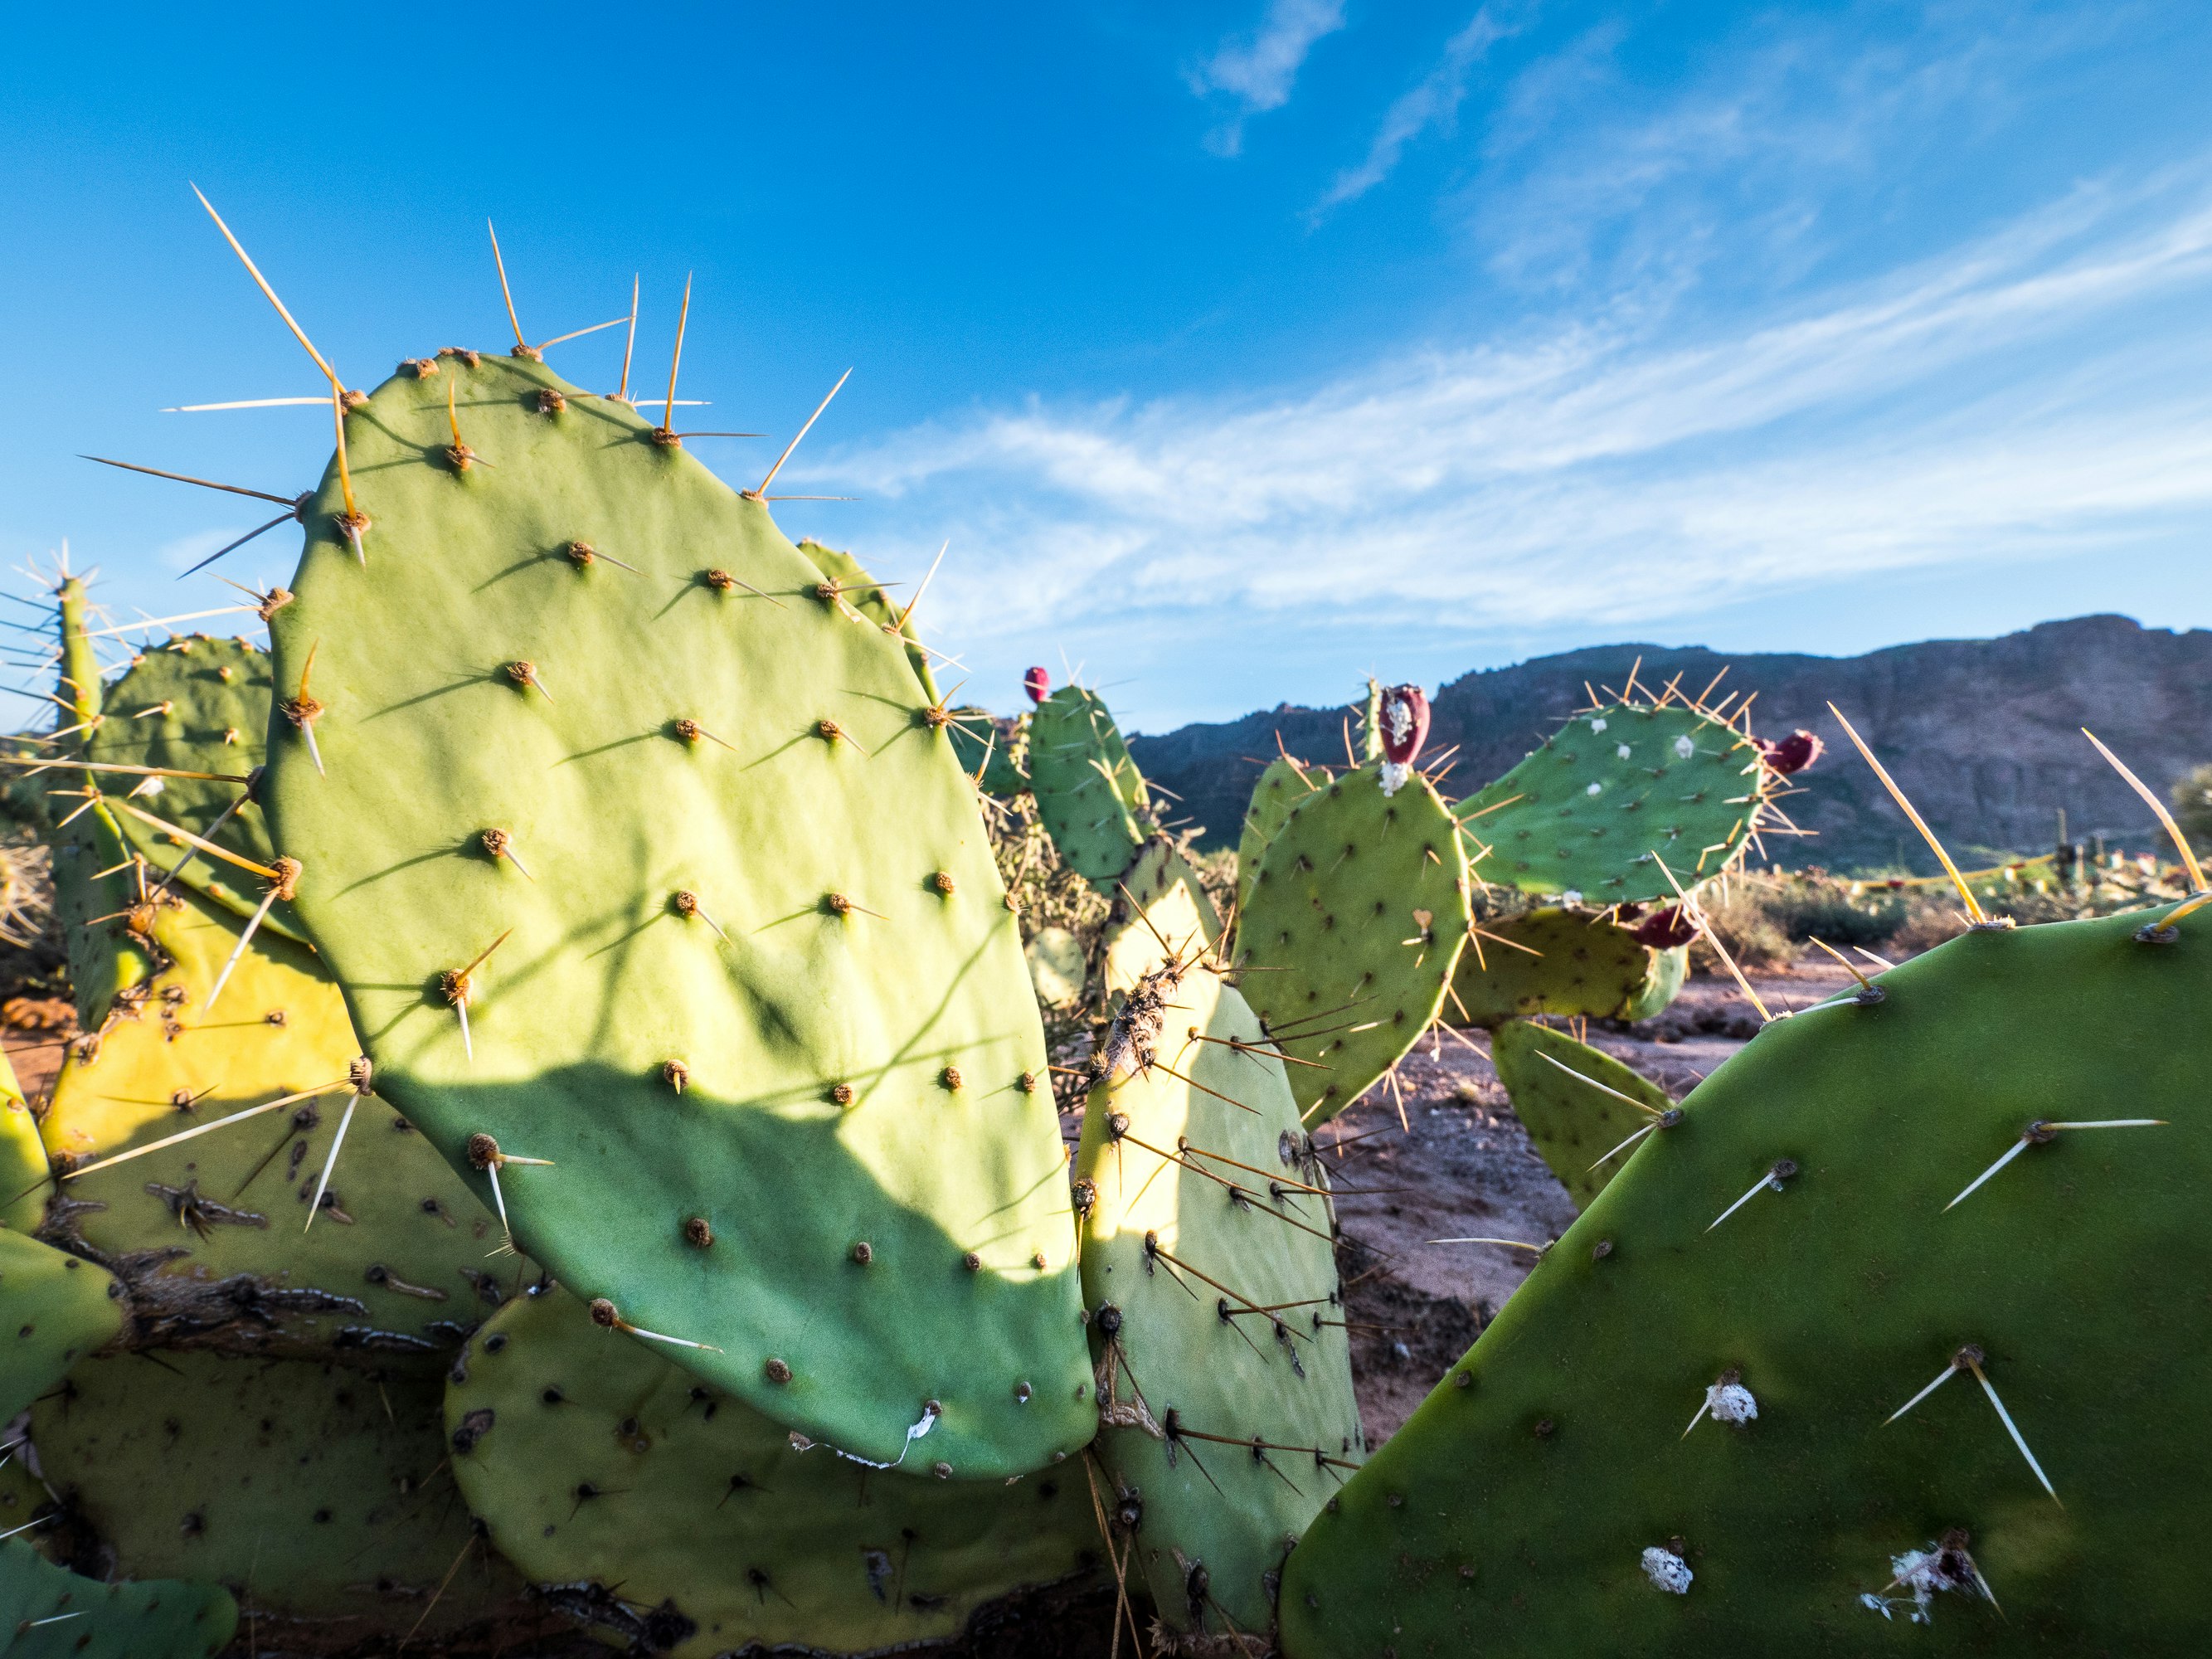 green cactus plants under blue sky during daytime